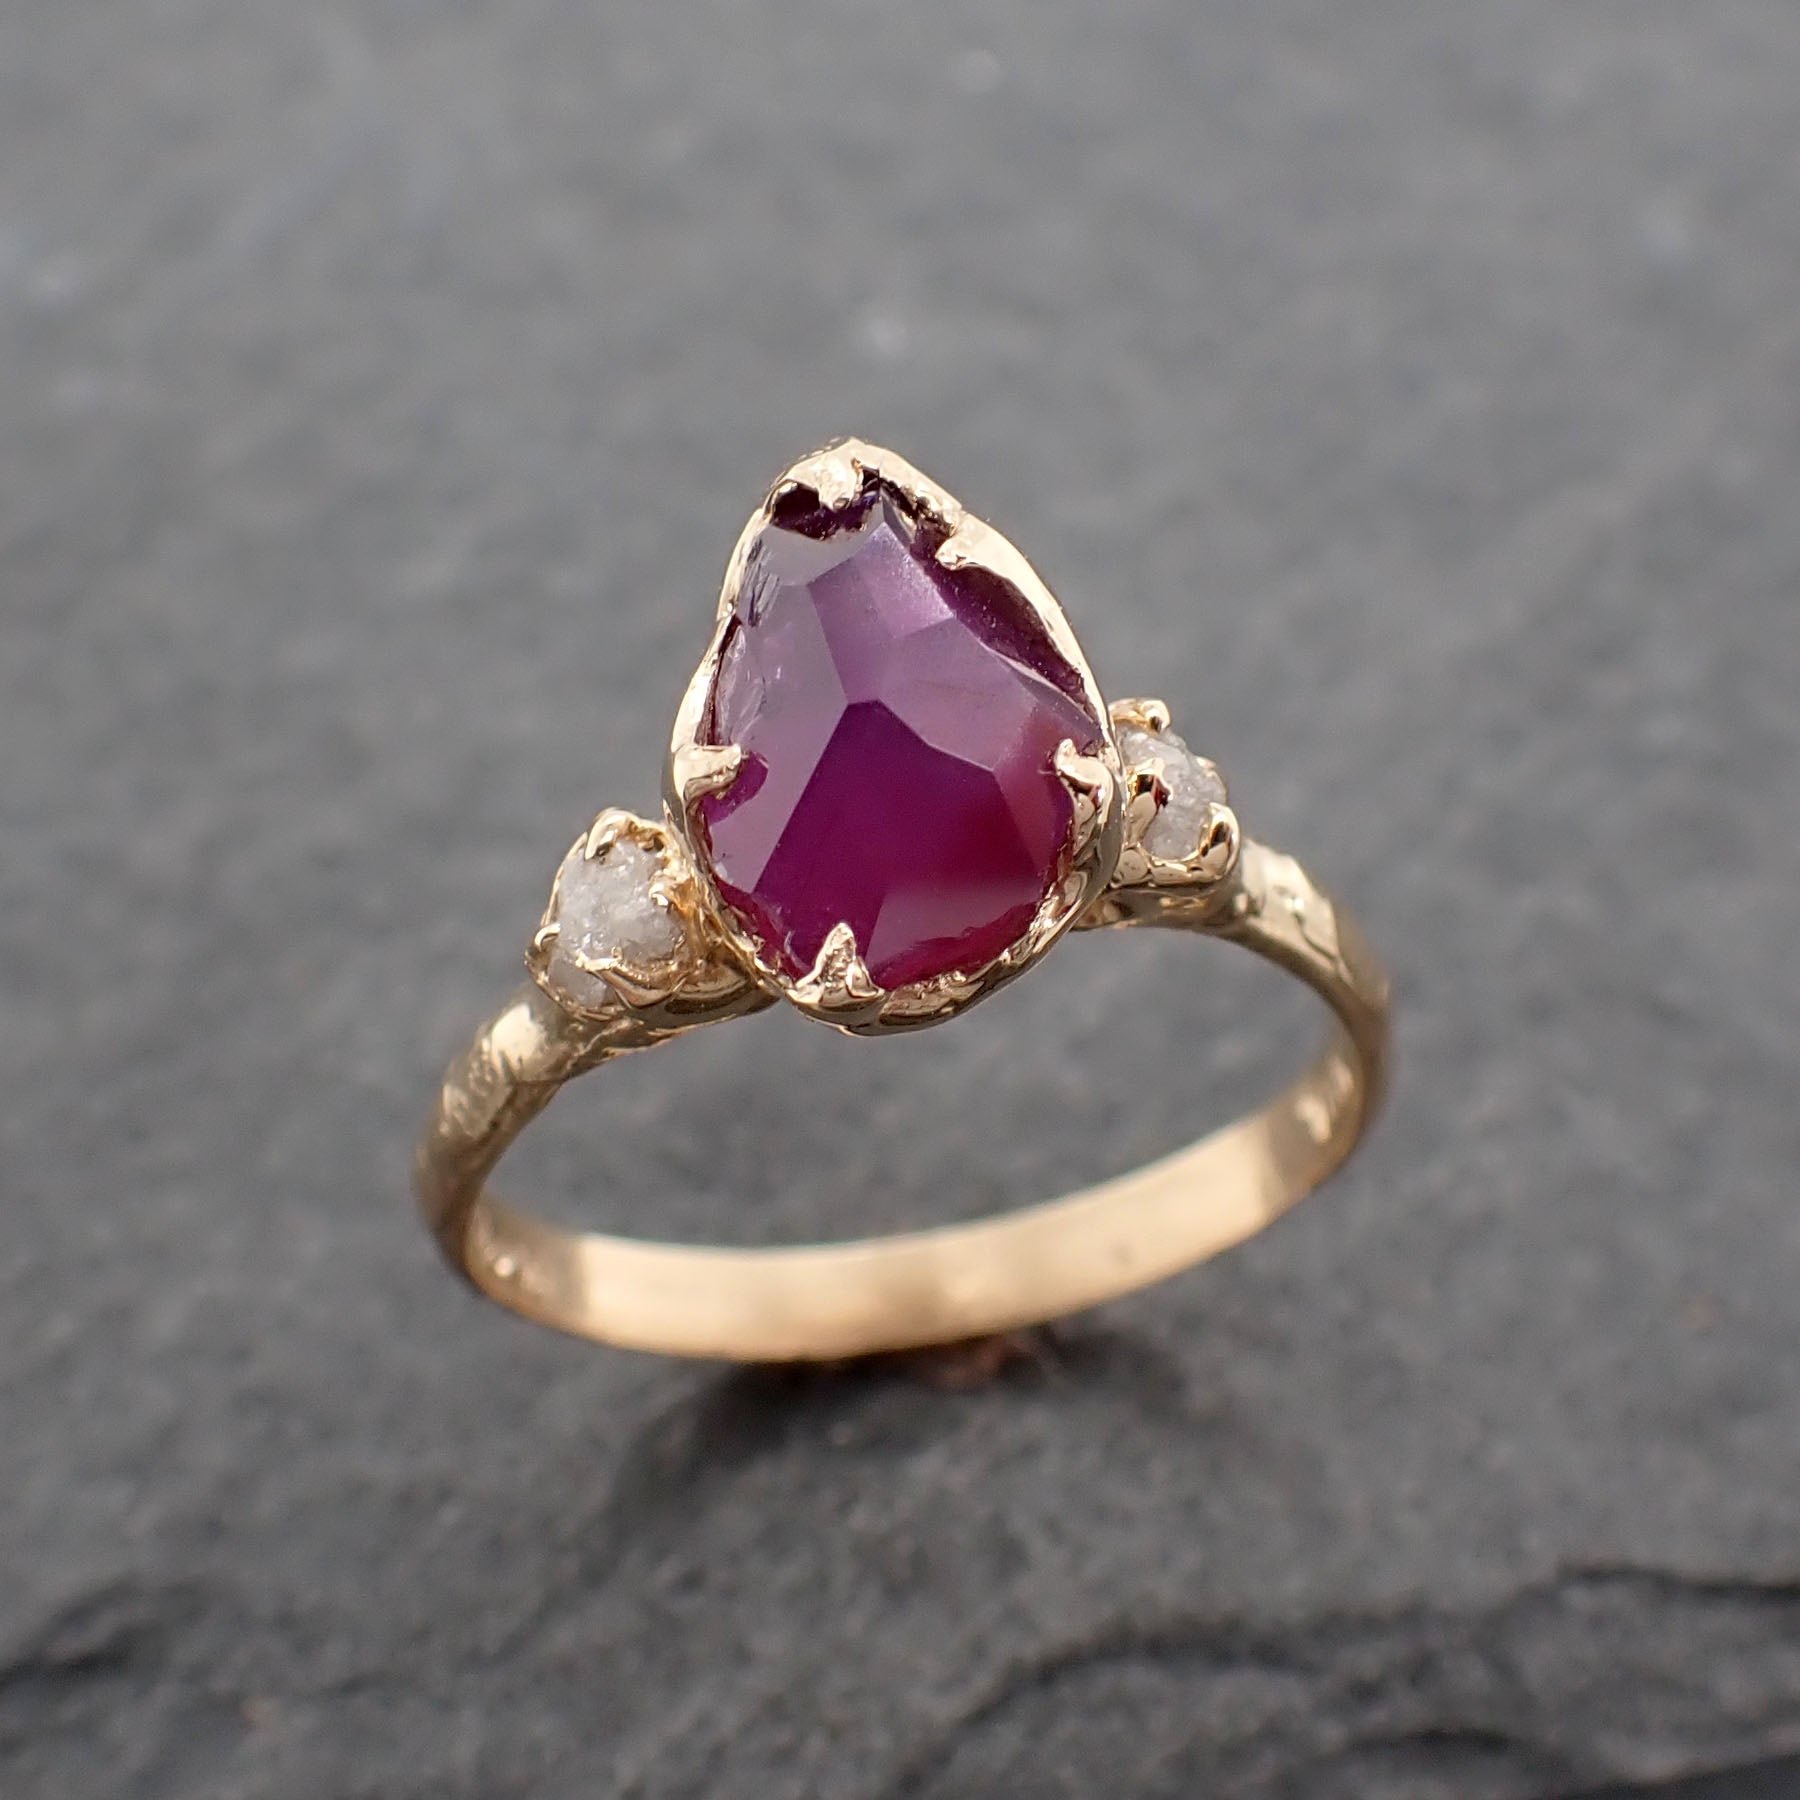 partially faceted sapphire gemstone raw rough diamond 18k yellow gold engagement ring multi stone 2437 Alternative Engagement